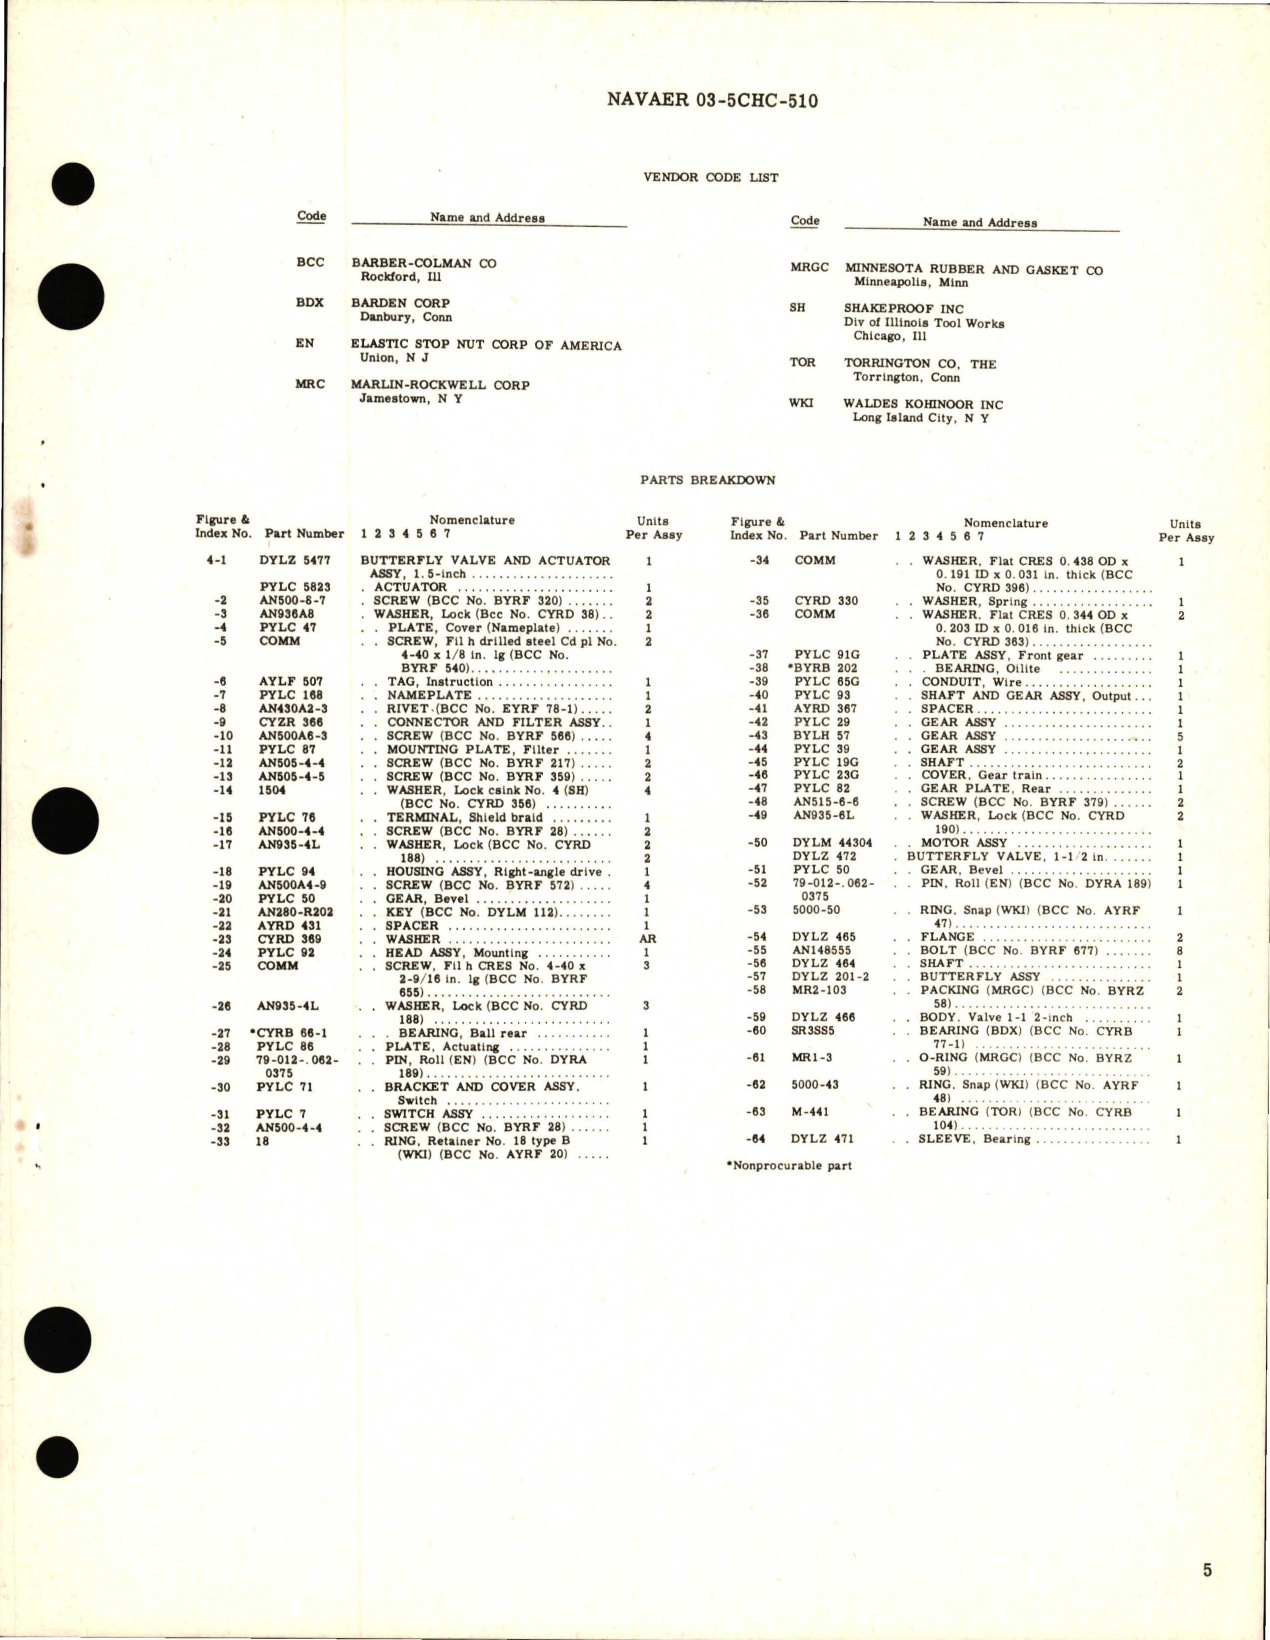 Sample page 5 from AirCorps Library document: Overhaul Instructions with Parts Breakdown for Valve and Actuator Assembly, 1.5 Inch Butterfly - DYLZ 5477